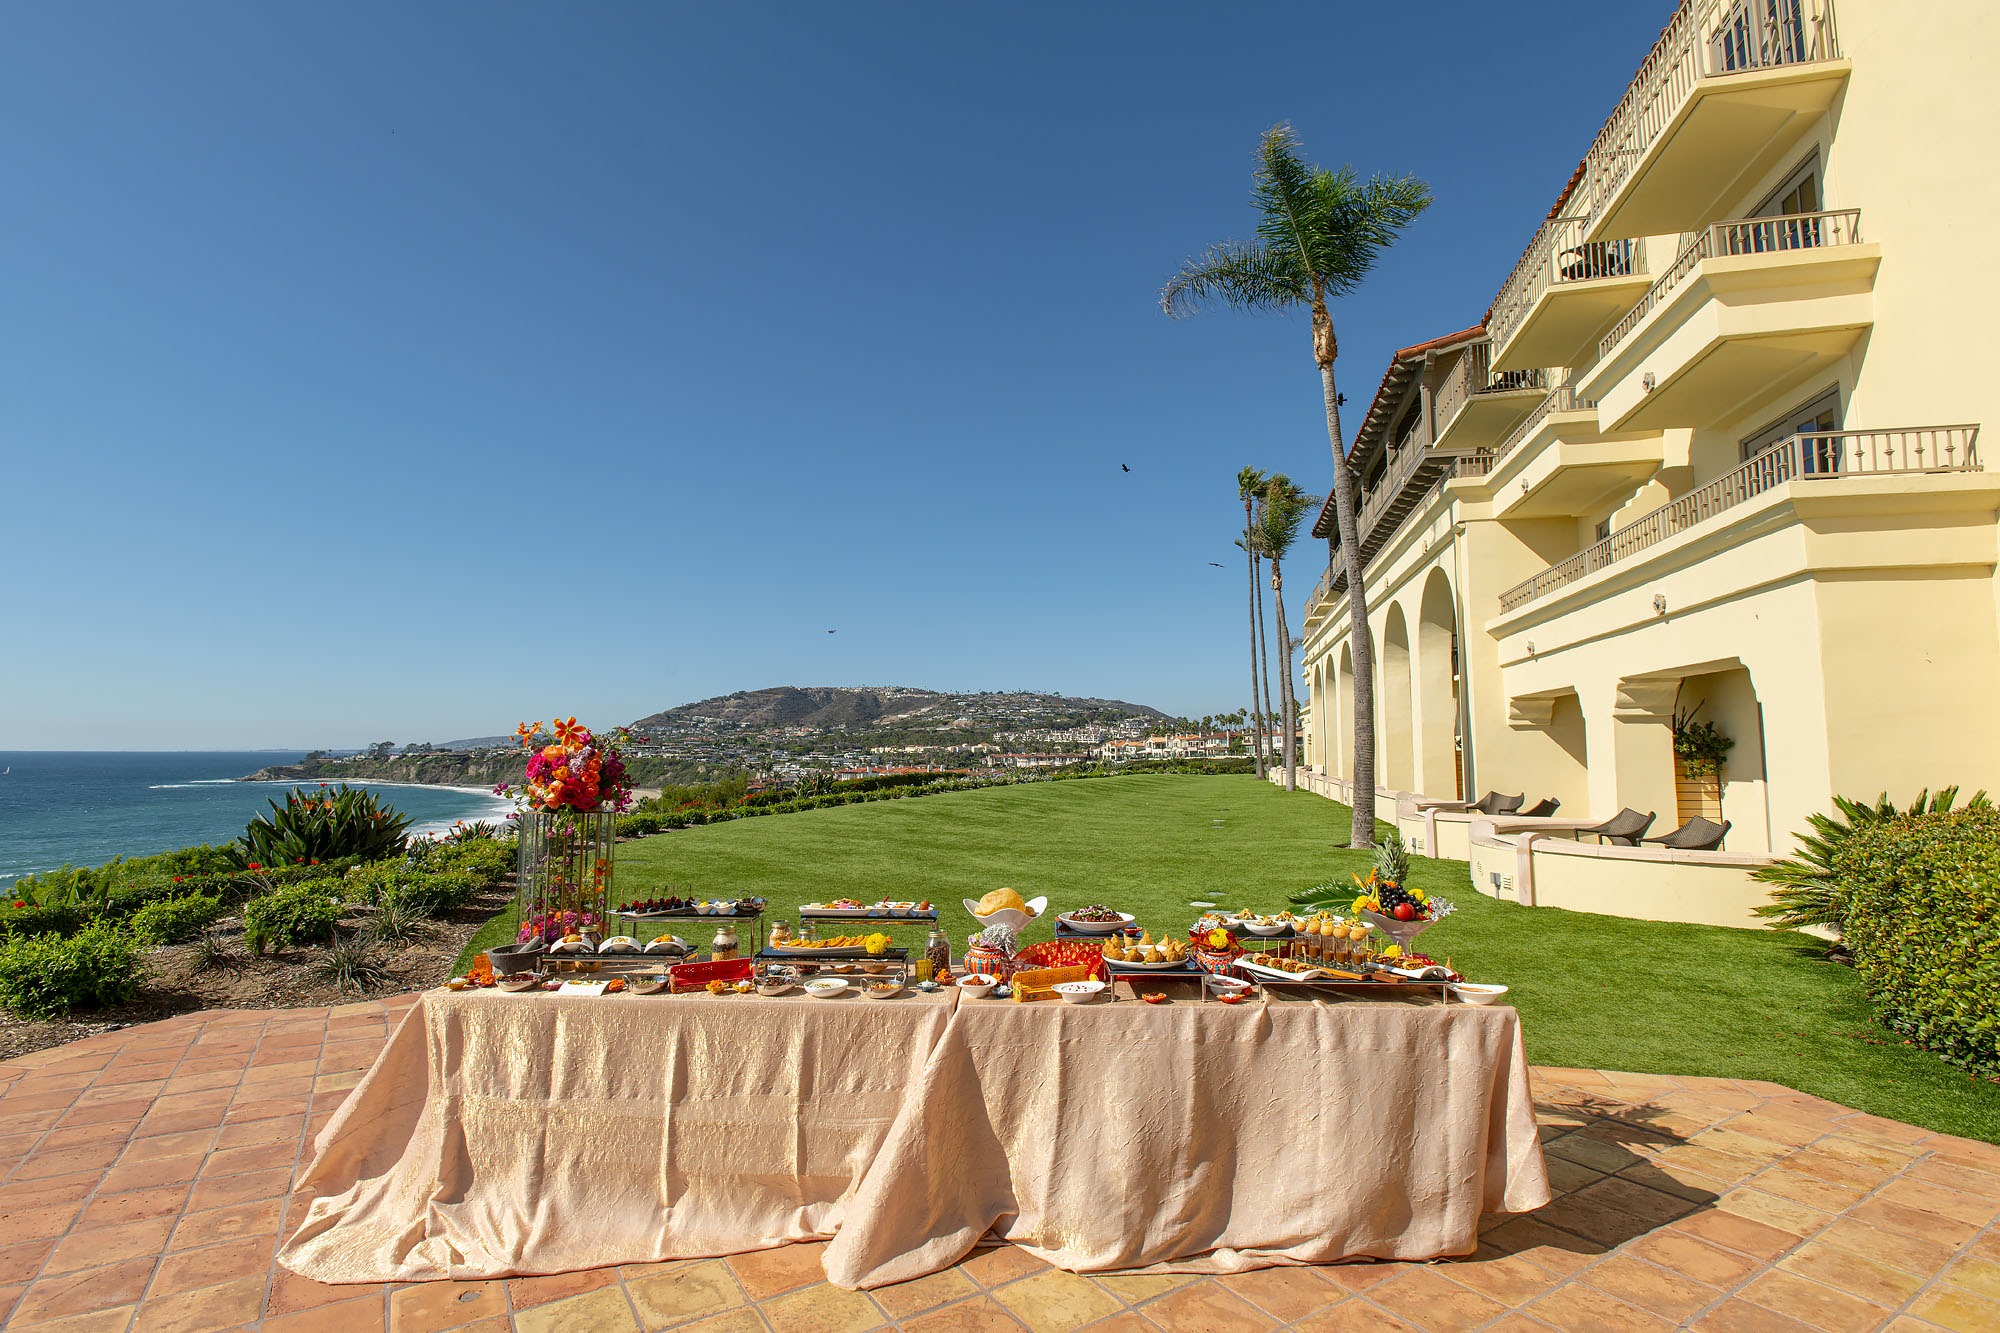 Landscape view of a hotel lawn overlooking the Pacific Ocean with a wedding buffet table spread in the foreground.